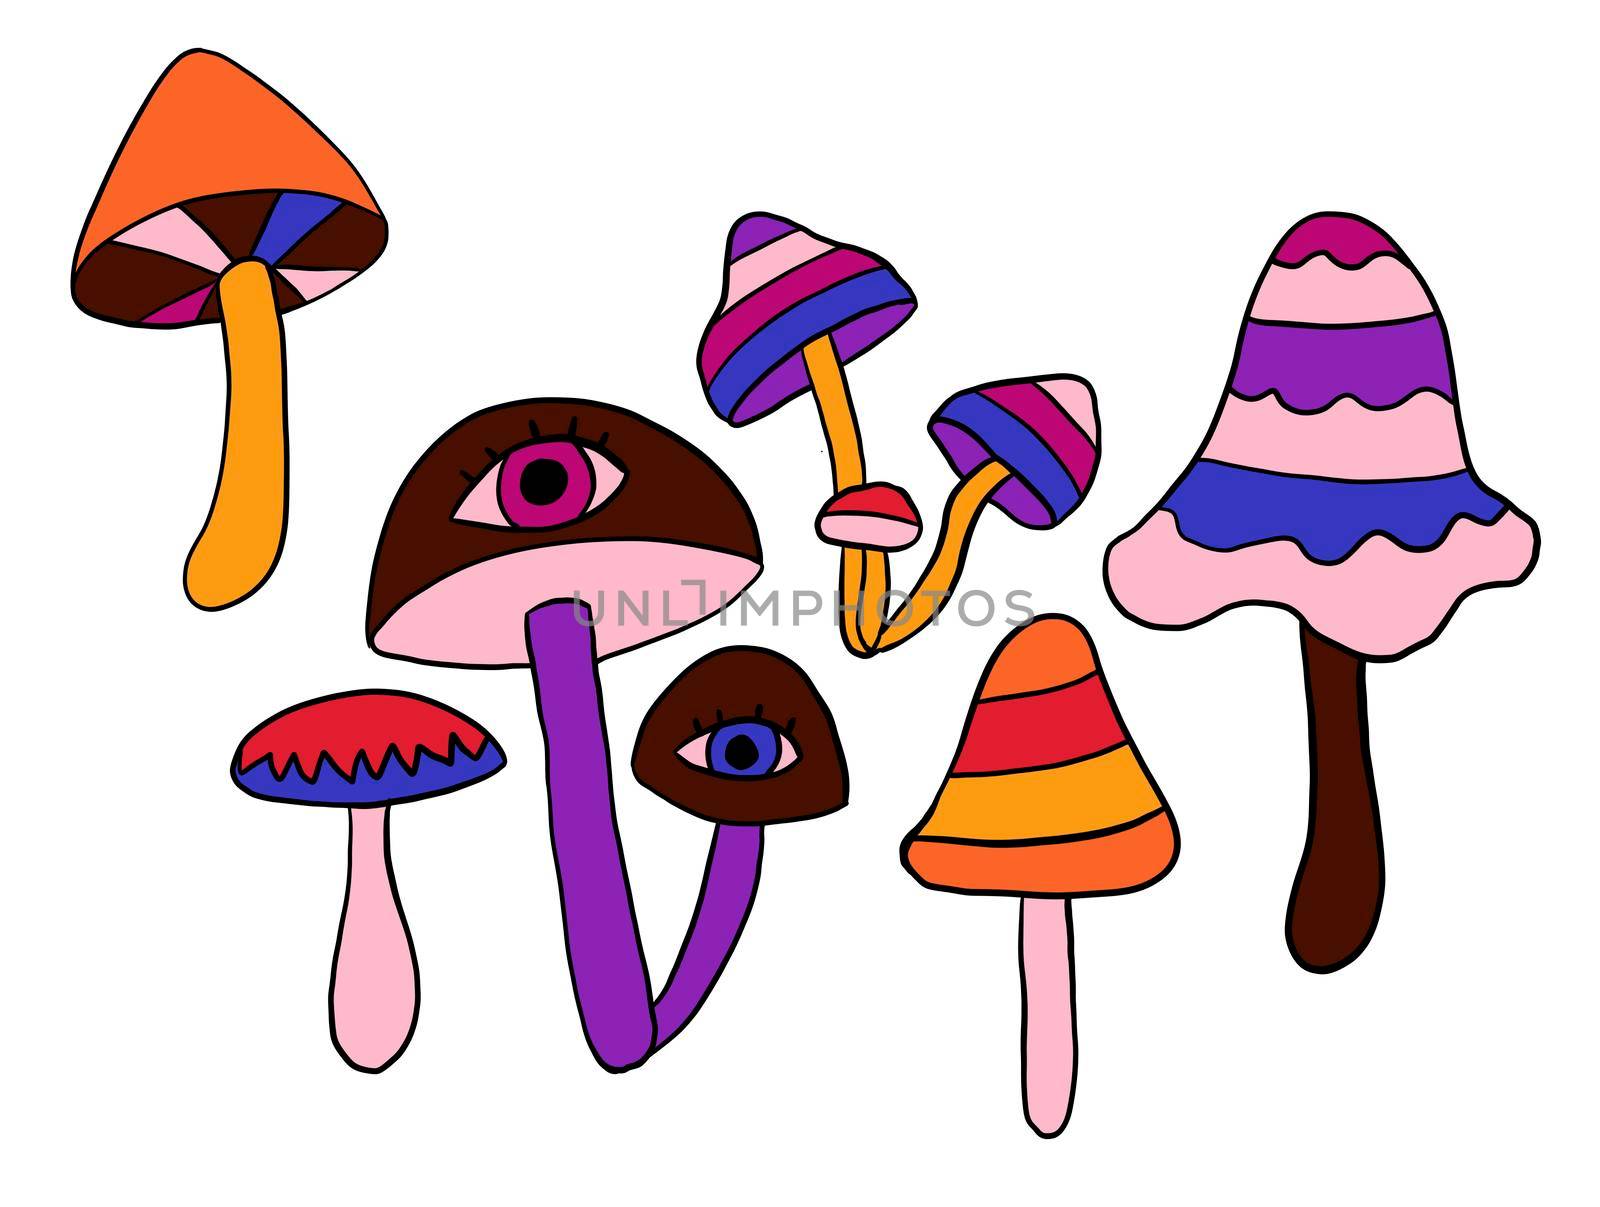 Hand drawn clipart illustration with hippie groovy mushrooms in orange purple blue red colors. Retro vintage 1960s 1970s style, trippy wild bright background with hallucination hypnotic elements. by Lagmar